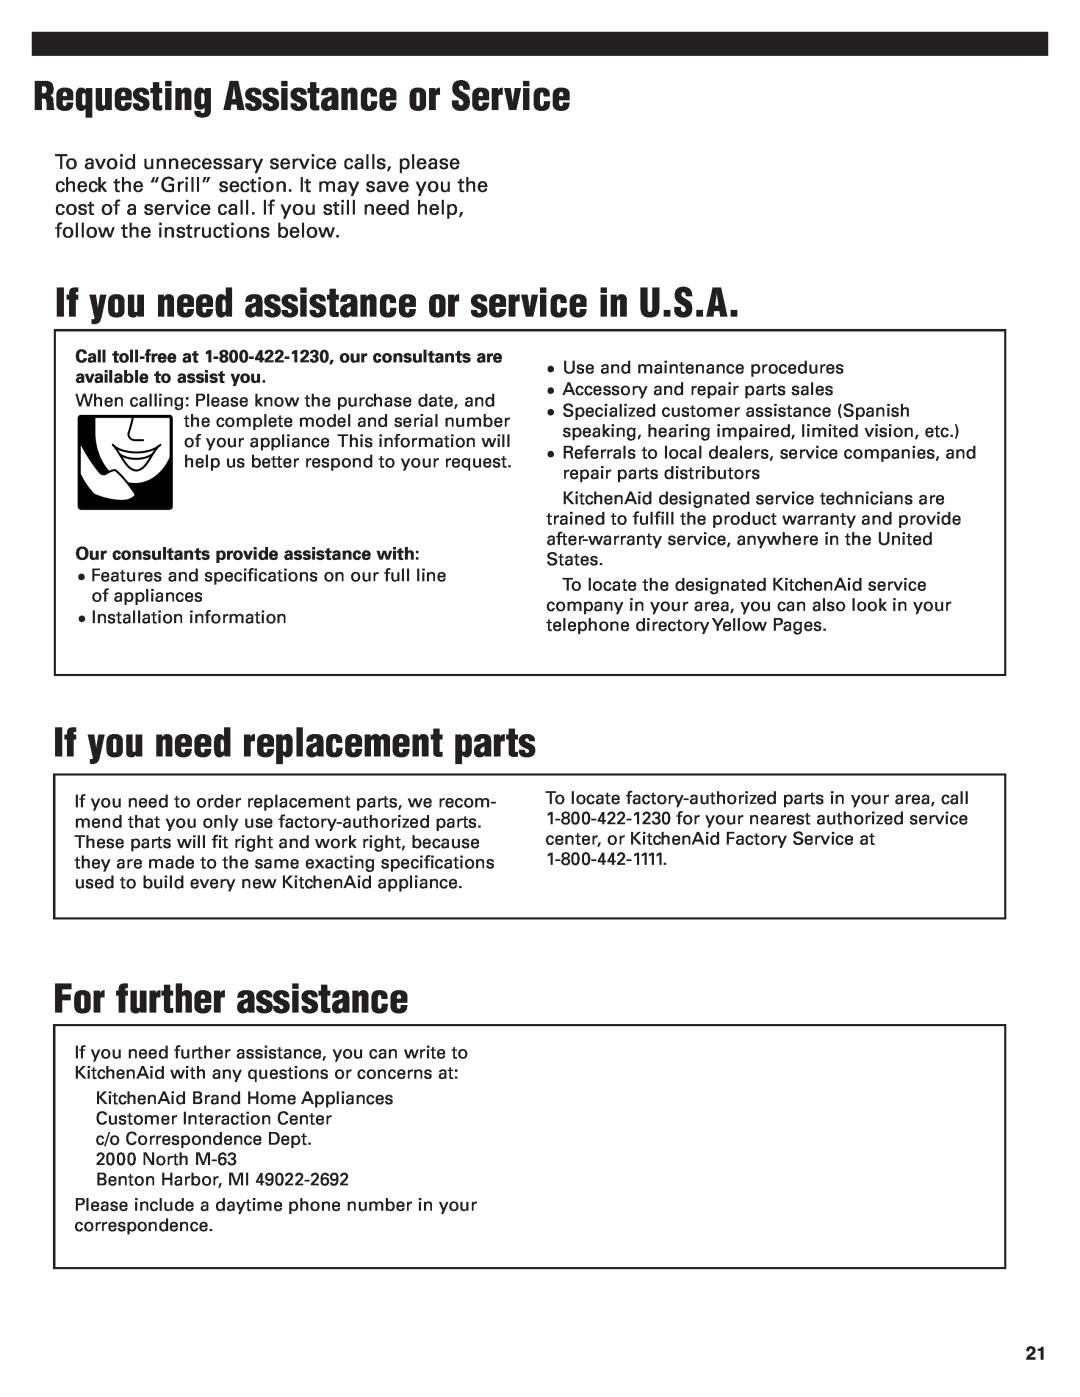 KitchenAid KBGN292 Requesting Assistance or Service, If you need assistance or service in U.S.A, For further assistance 